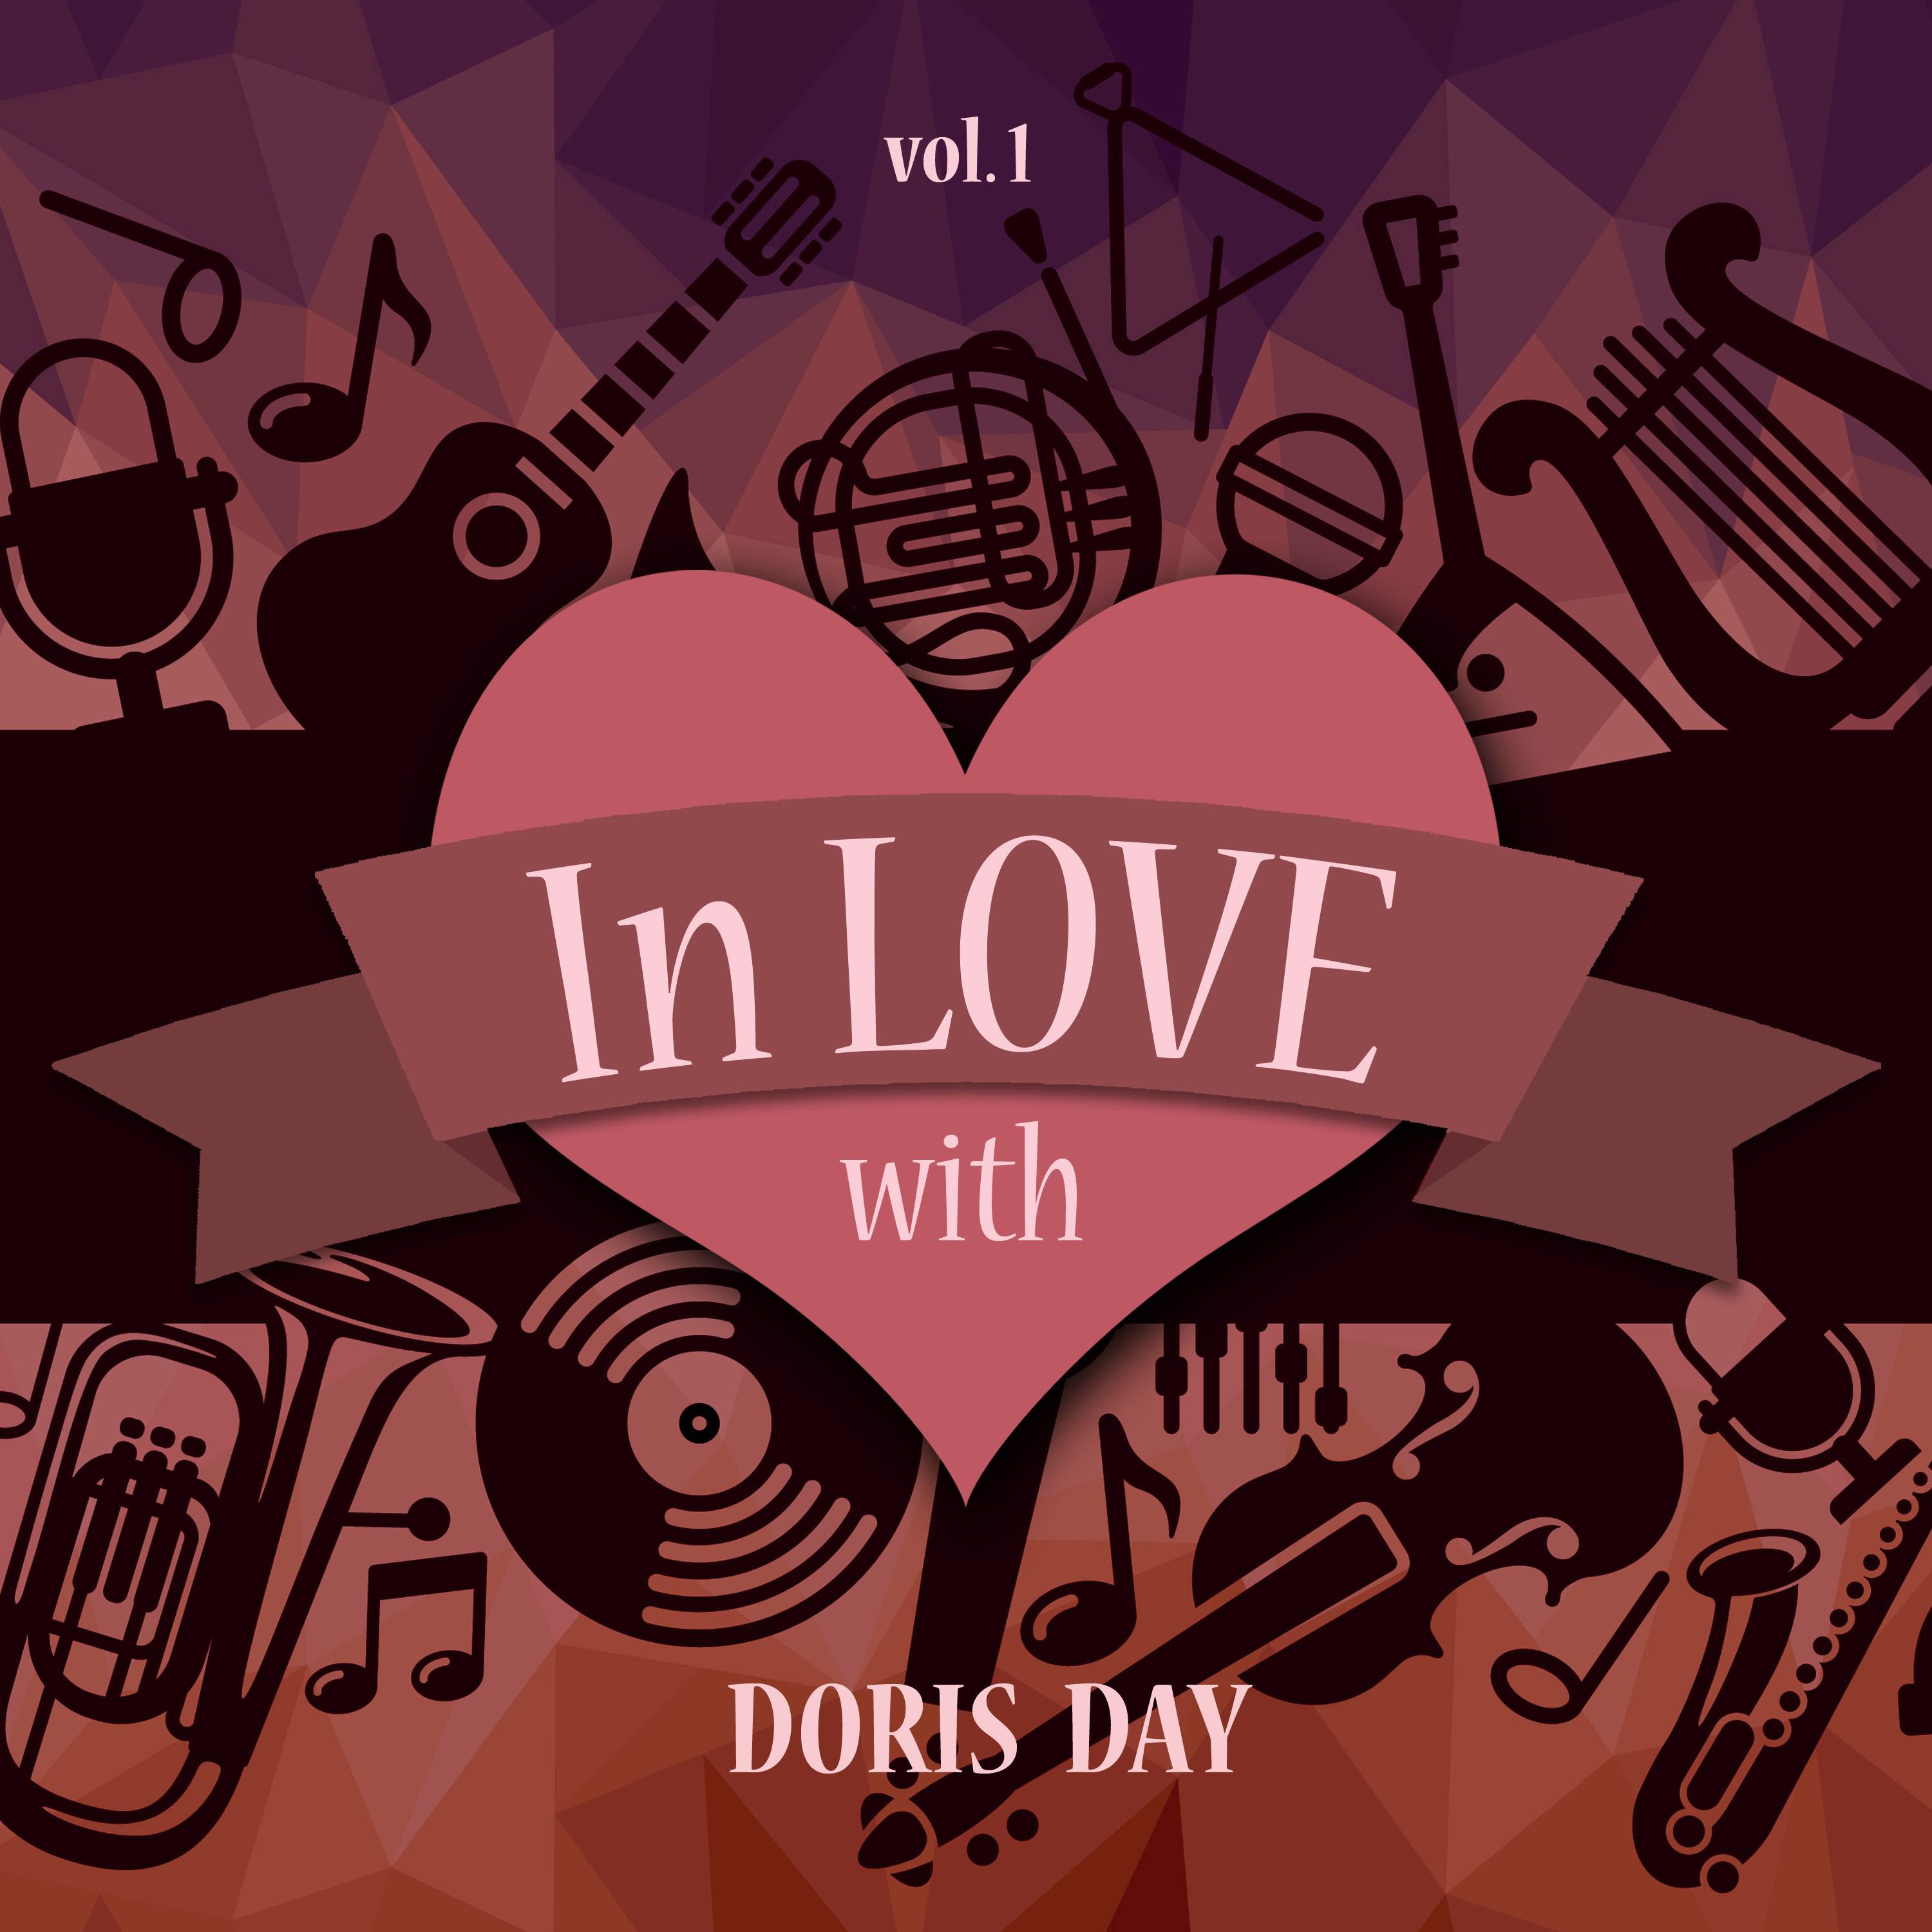 In Love with Doris Day, Vol. 1